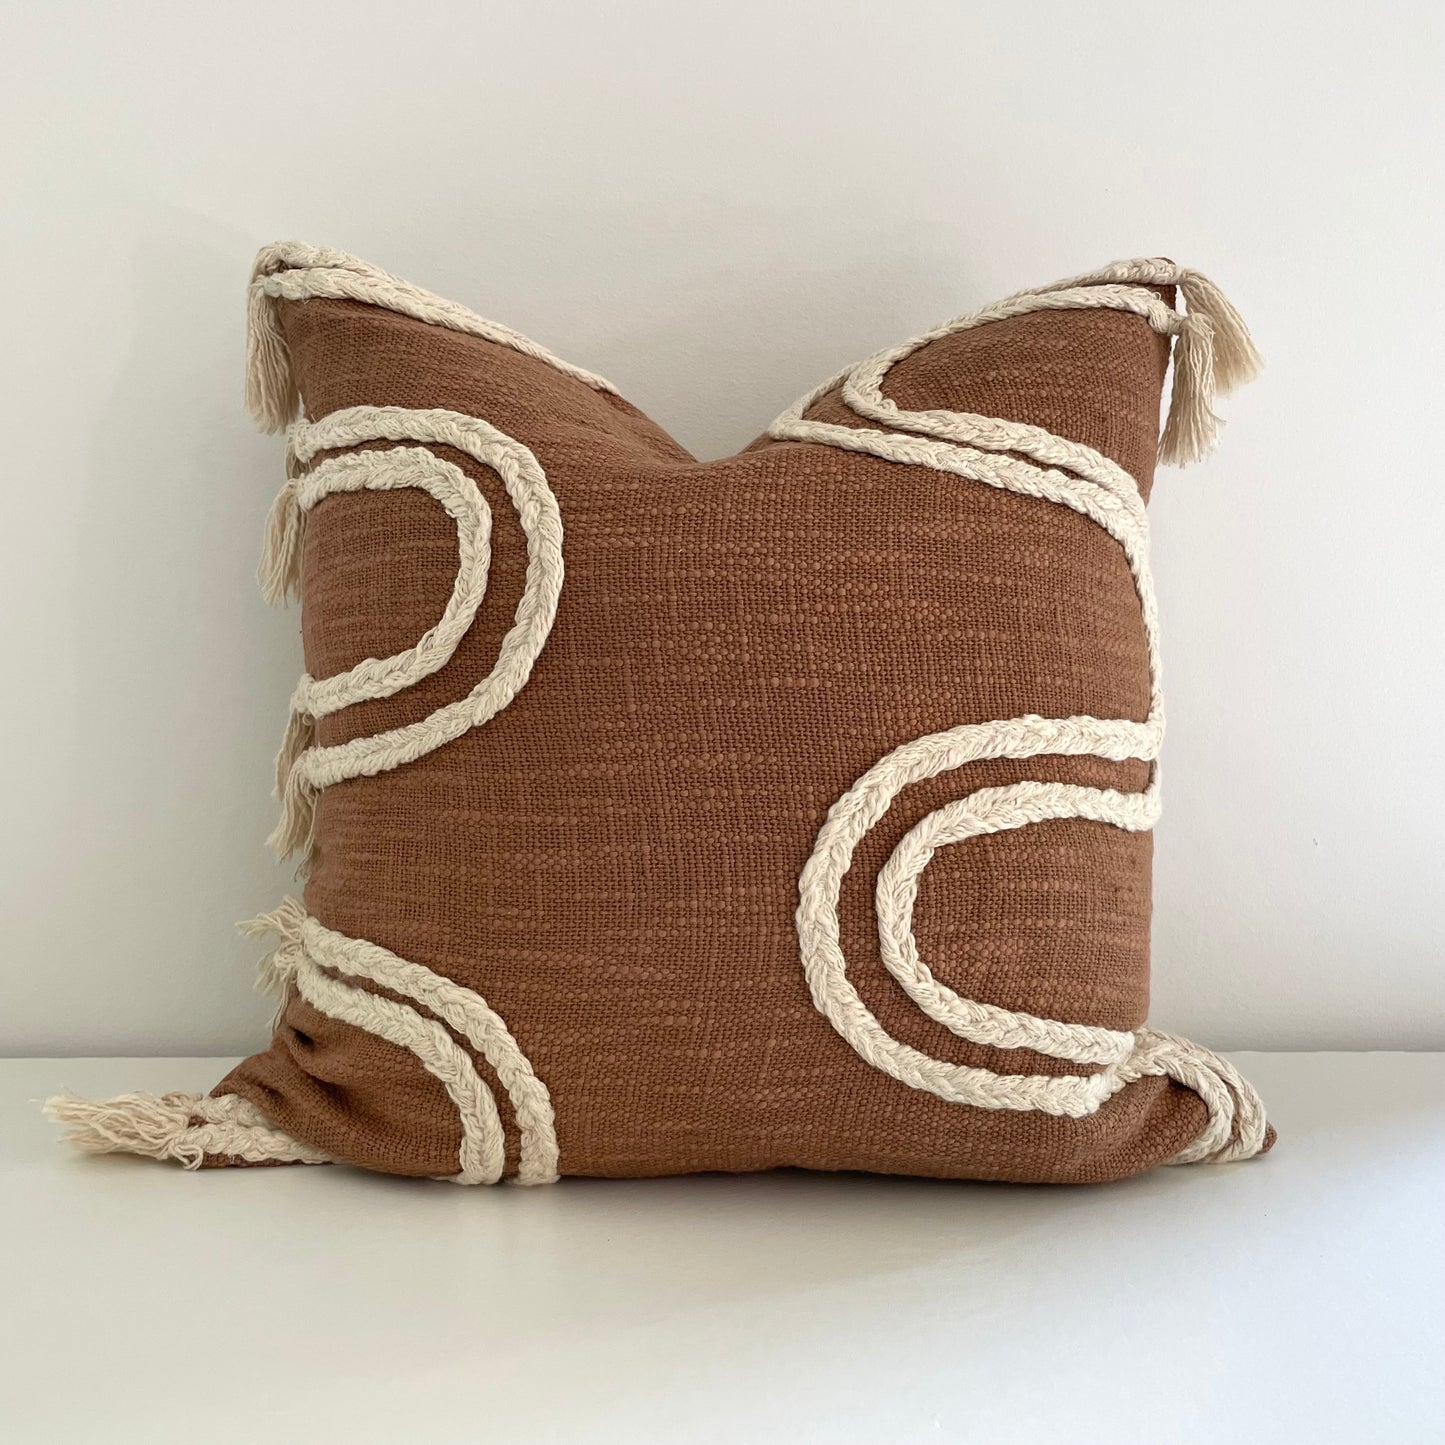 neutral rust and cream woven 18 inch square boho pillow cover with braids and tassels